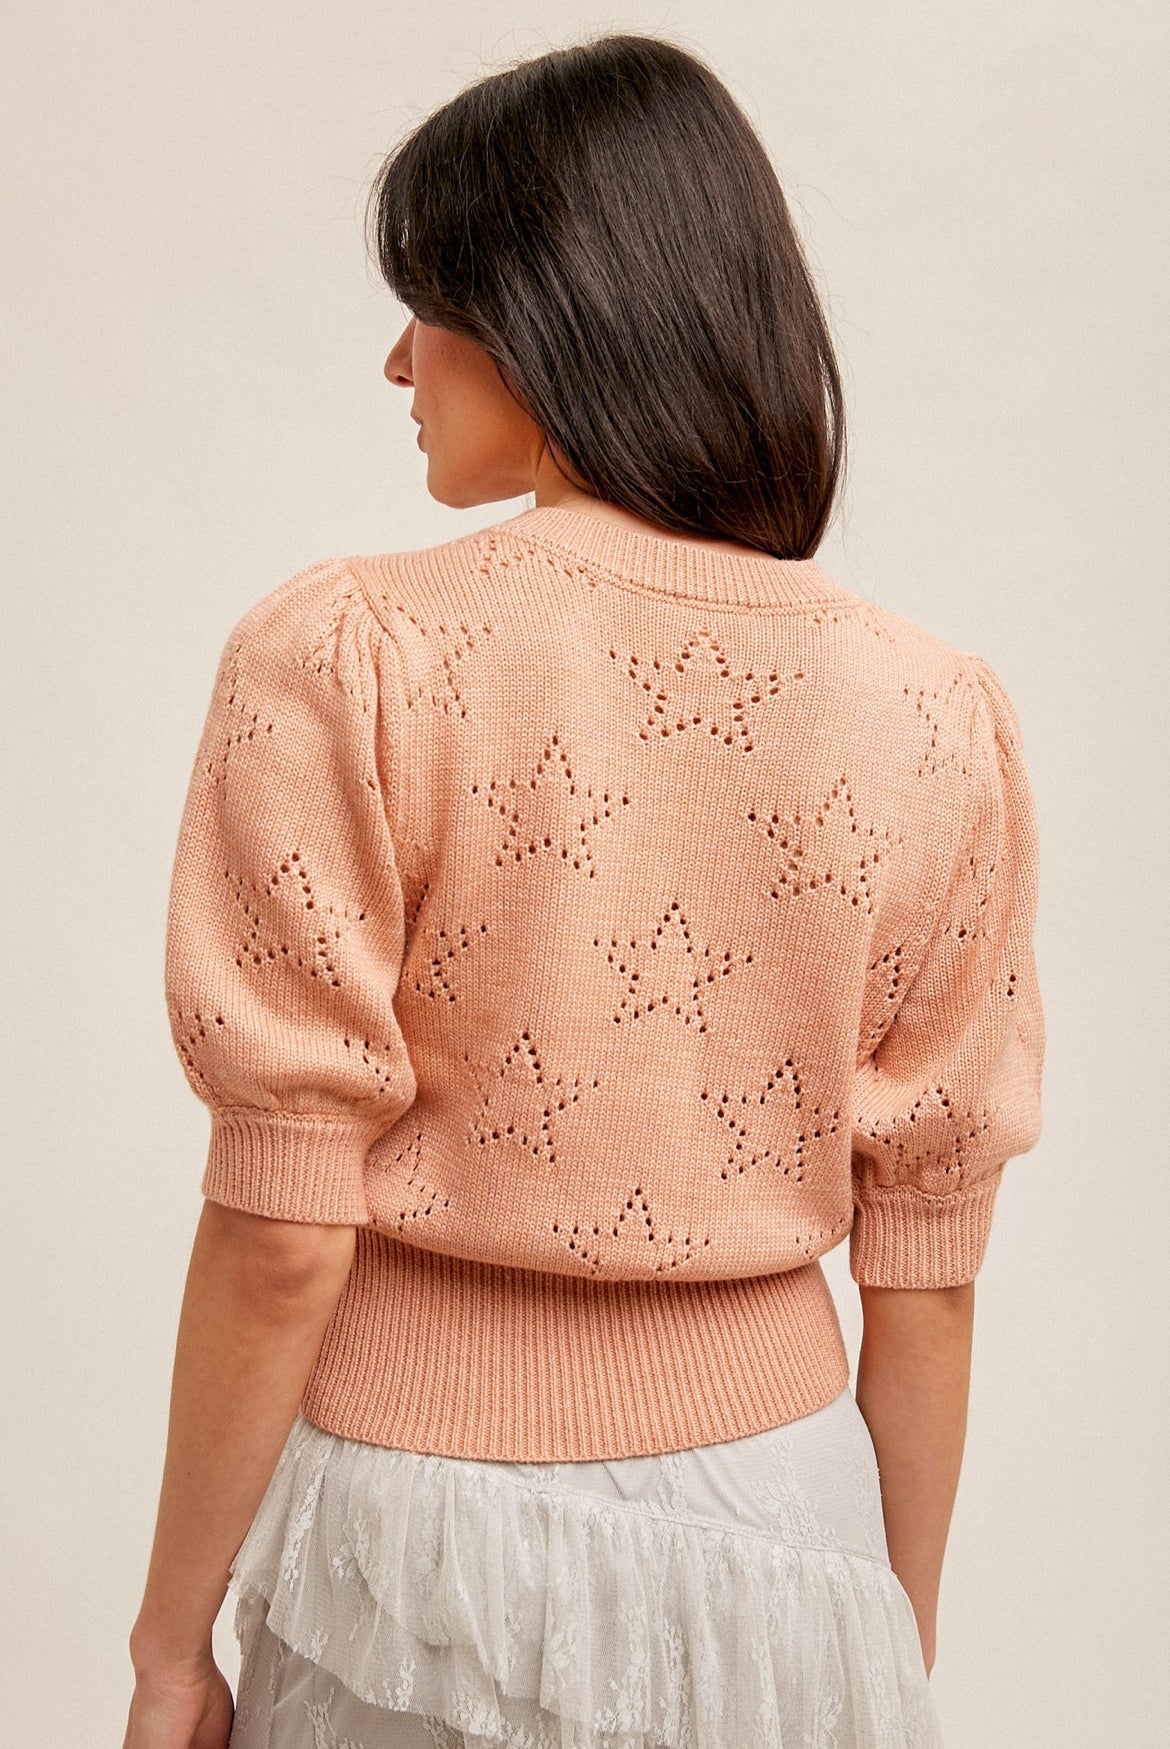 Counting Stars Sweater